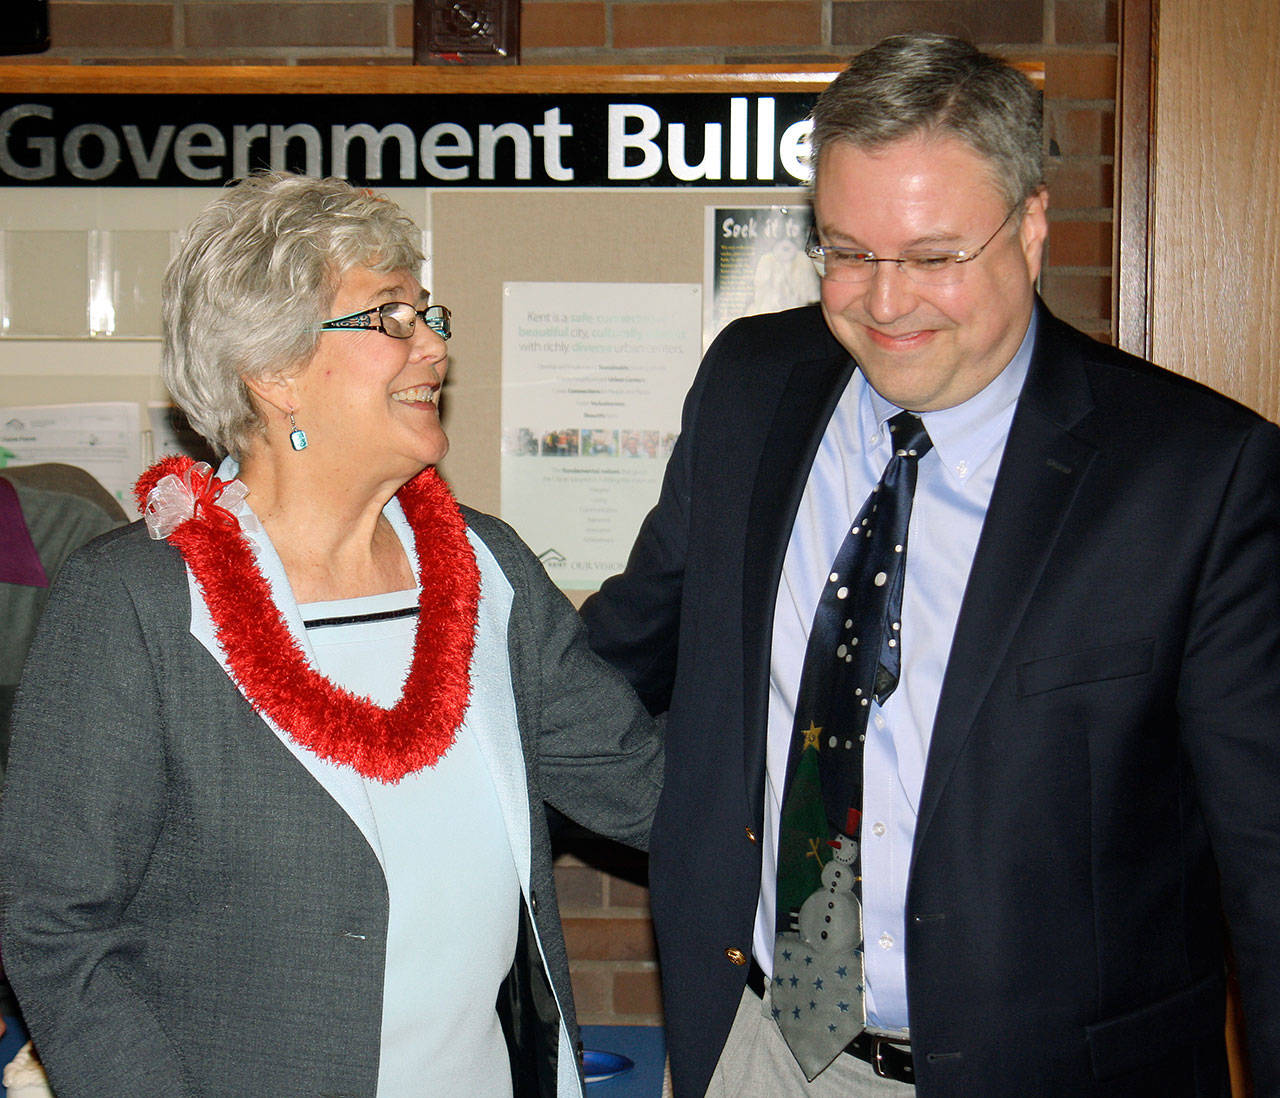 Mayor Suzette Cooke shares a laugh with city Chief Administrative Officer Derek Mathesen during a reception at City Hall on Tuesday. STEVE HUNTER, Kent Reporter